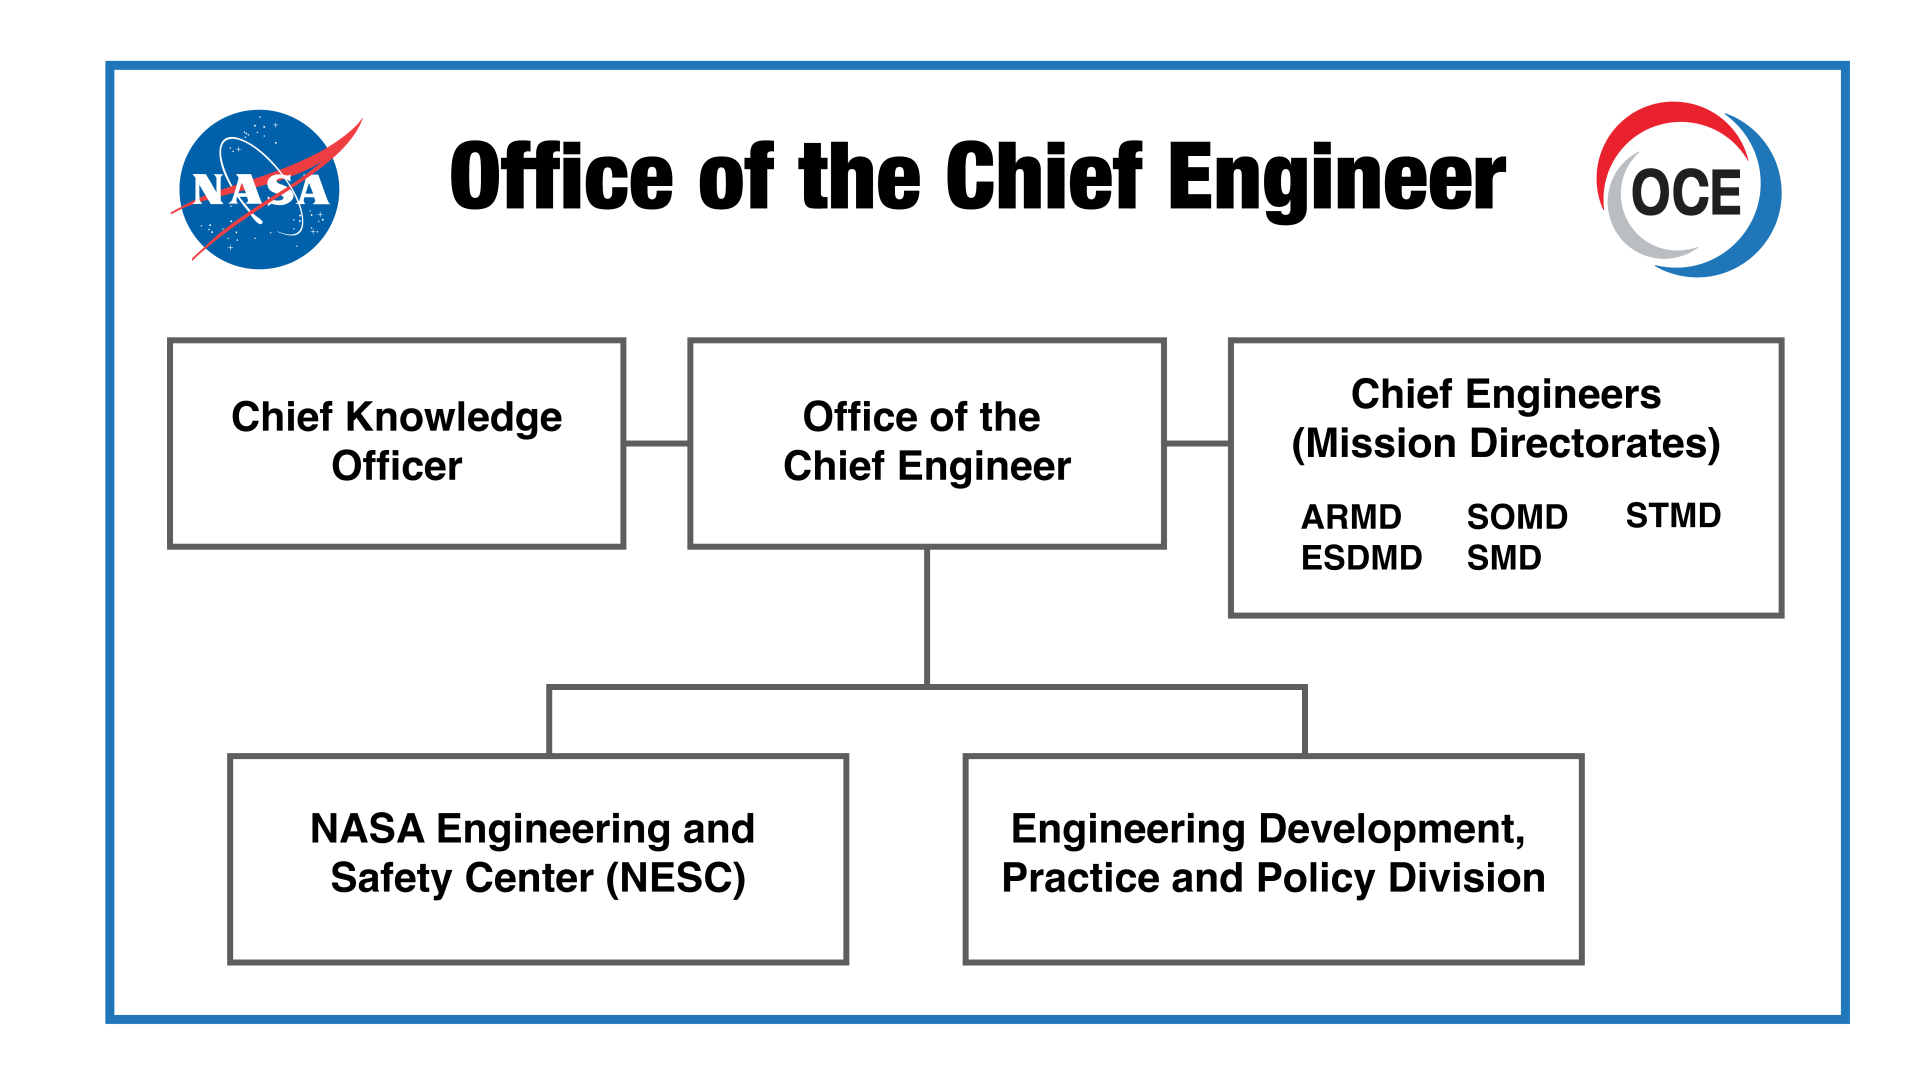 Office of the Chief Engineer Organizational Chart. The first row, going left to right, has three boxes: first box is "Chief Knowledge Officer", second box is "Office of the Chief Engineer", third box is "Chief Engineers (Missions Directorates), ARMD, ESDMD, SOMD, SMD, STMD". The middle OCE box branches down into two boxes. First box is "NASA Engineering and Safety Center (NESC)", and second box is "Engineering Development, Practice and Policy Division." Credit: NASA